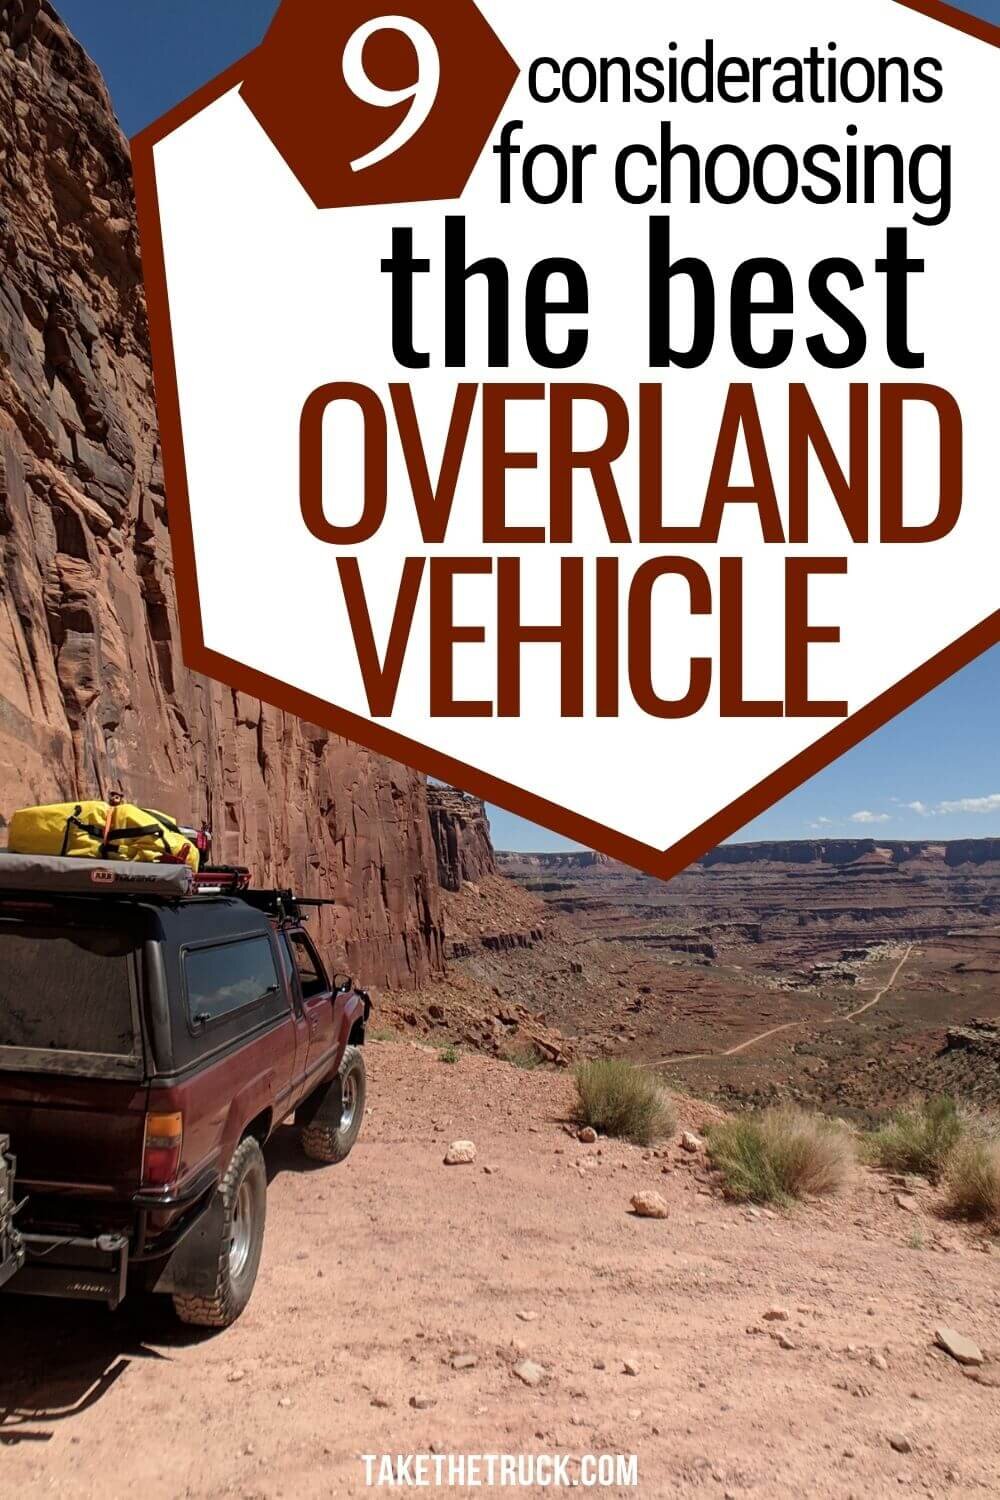 Looking for an overlanding vehicle? 8 different considerations are outlined, as are pros and cons to different overlanding rigs - this guide can help you find the perfect overland truck or SUV. 